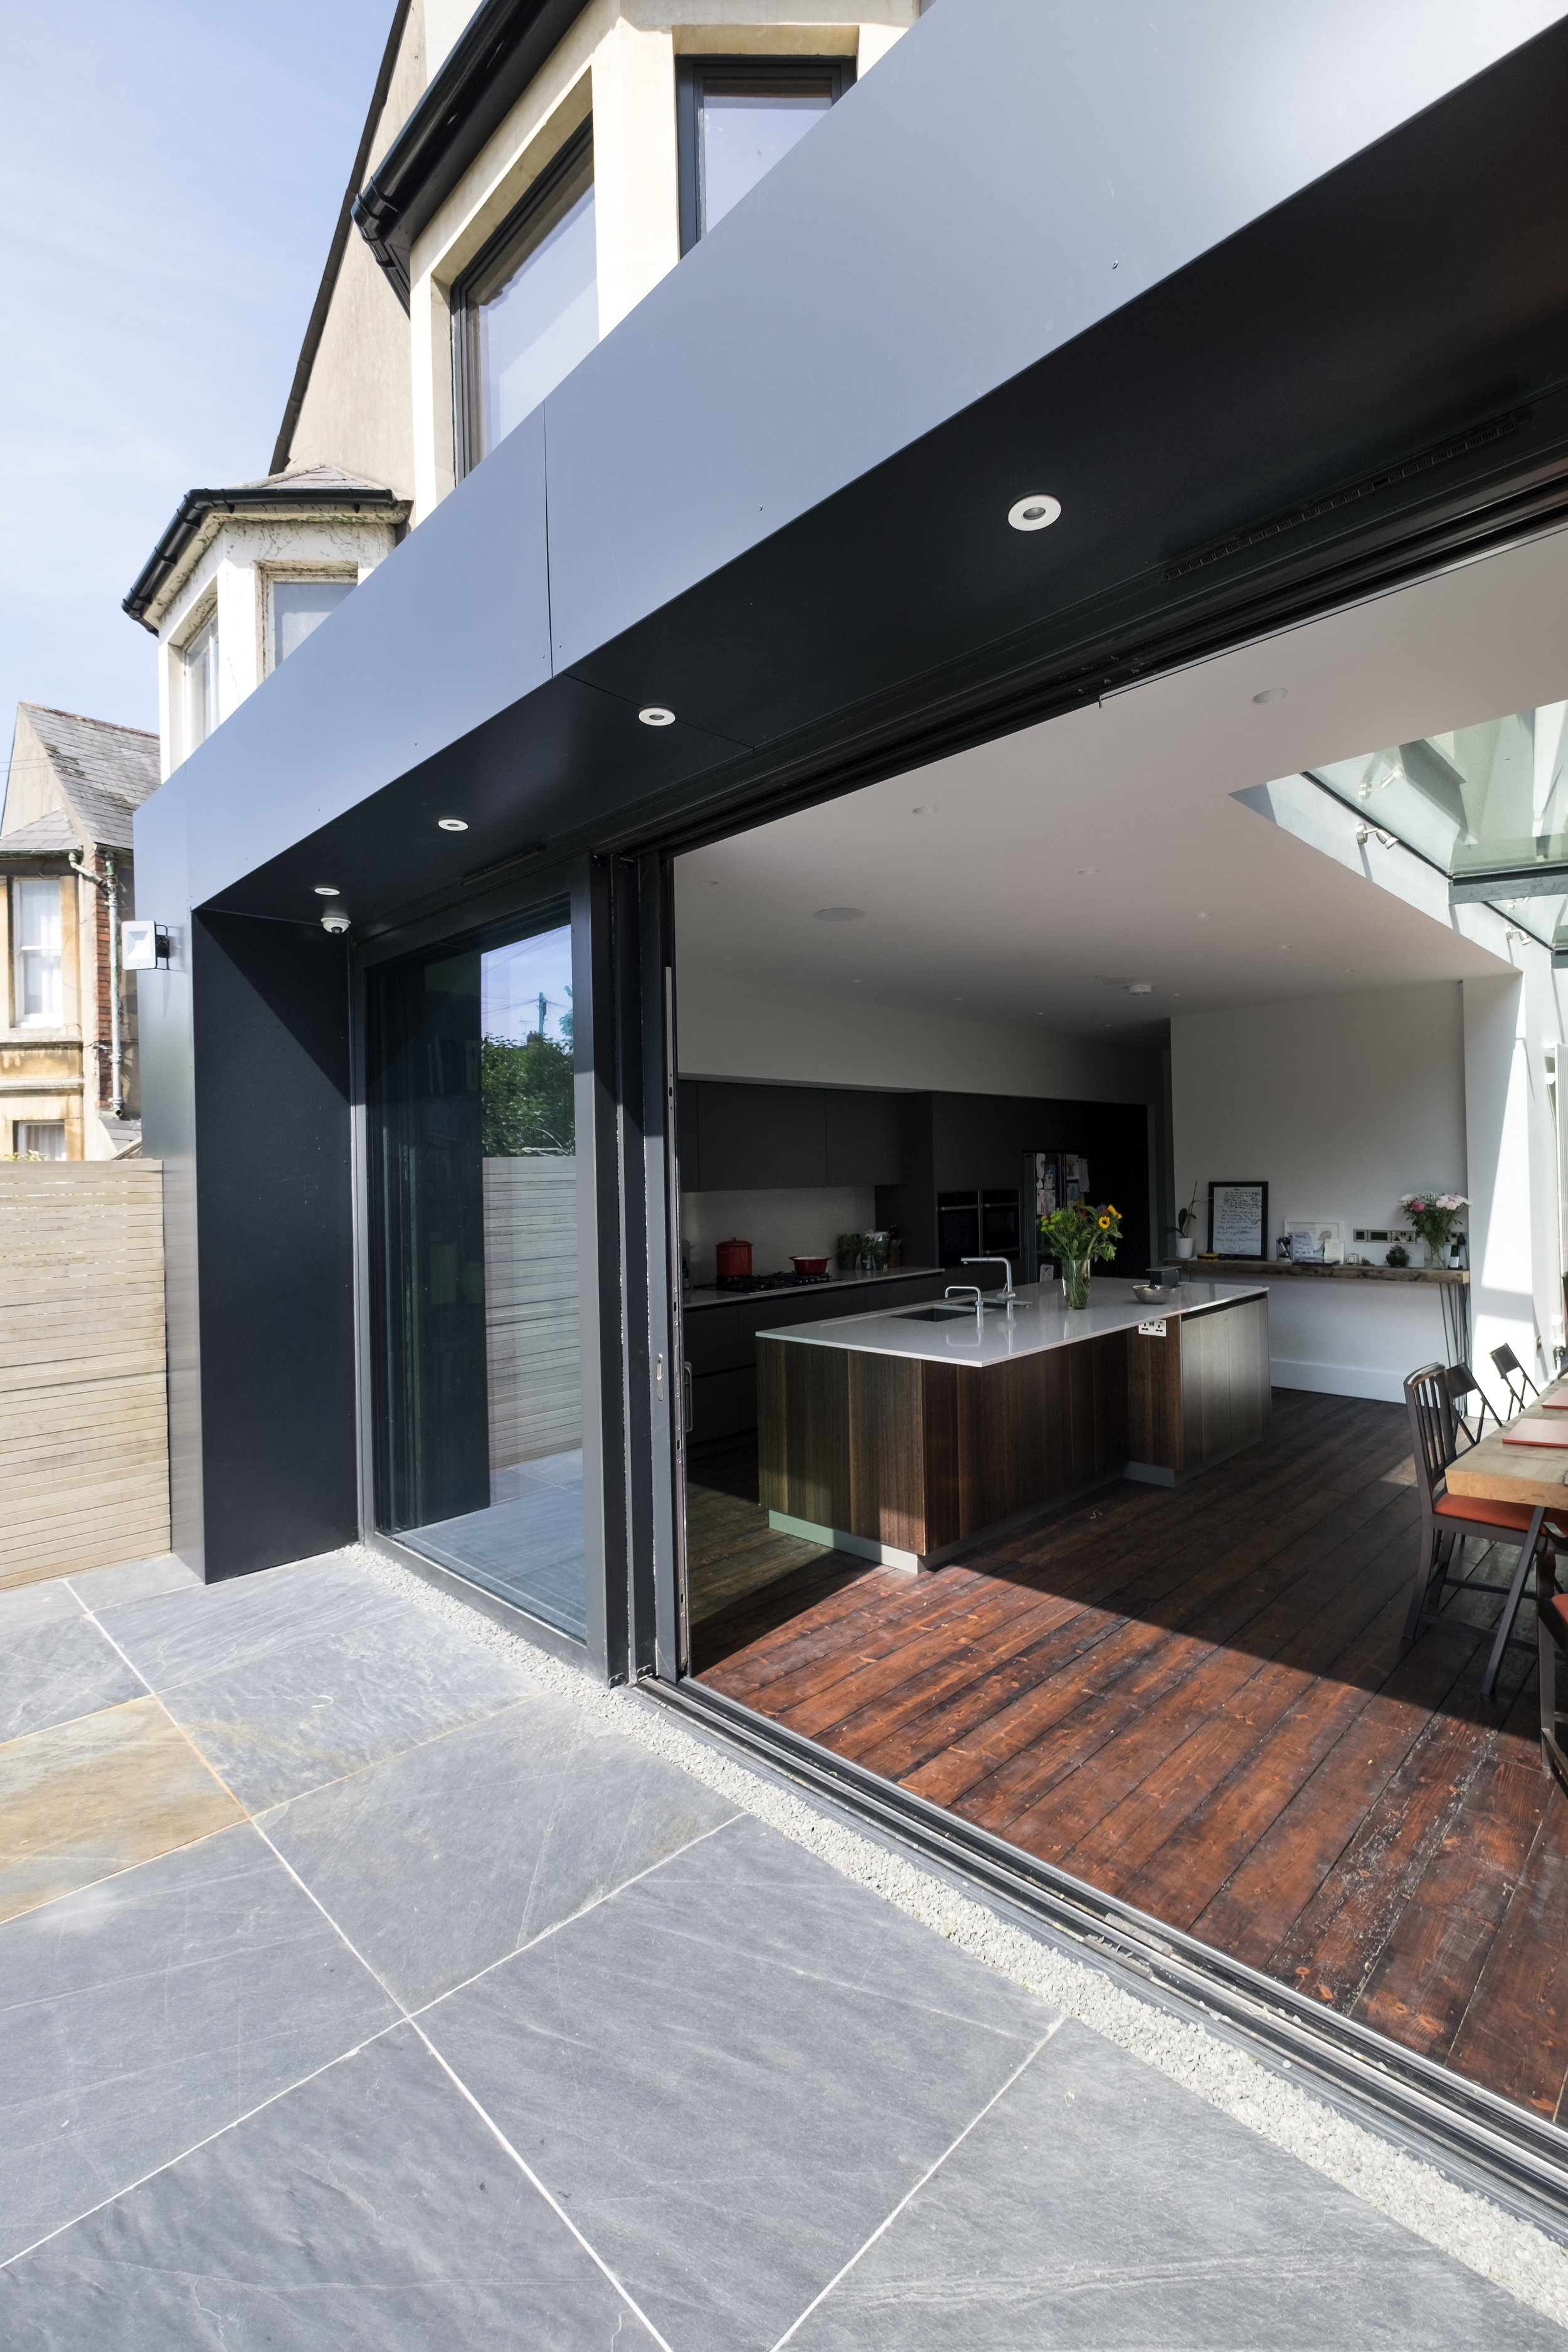  The dark grey Aluminium cladding, with full height lift and slide solar control glass doors, reclaimed stained timber floorboards and Welsh slate tiles, blend beautifully the outside with the inside ;&nbsp;the old and the new.  The existing Victoria